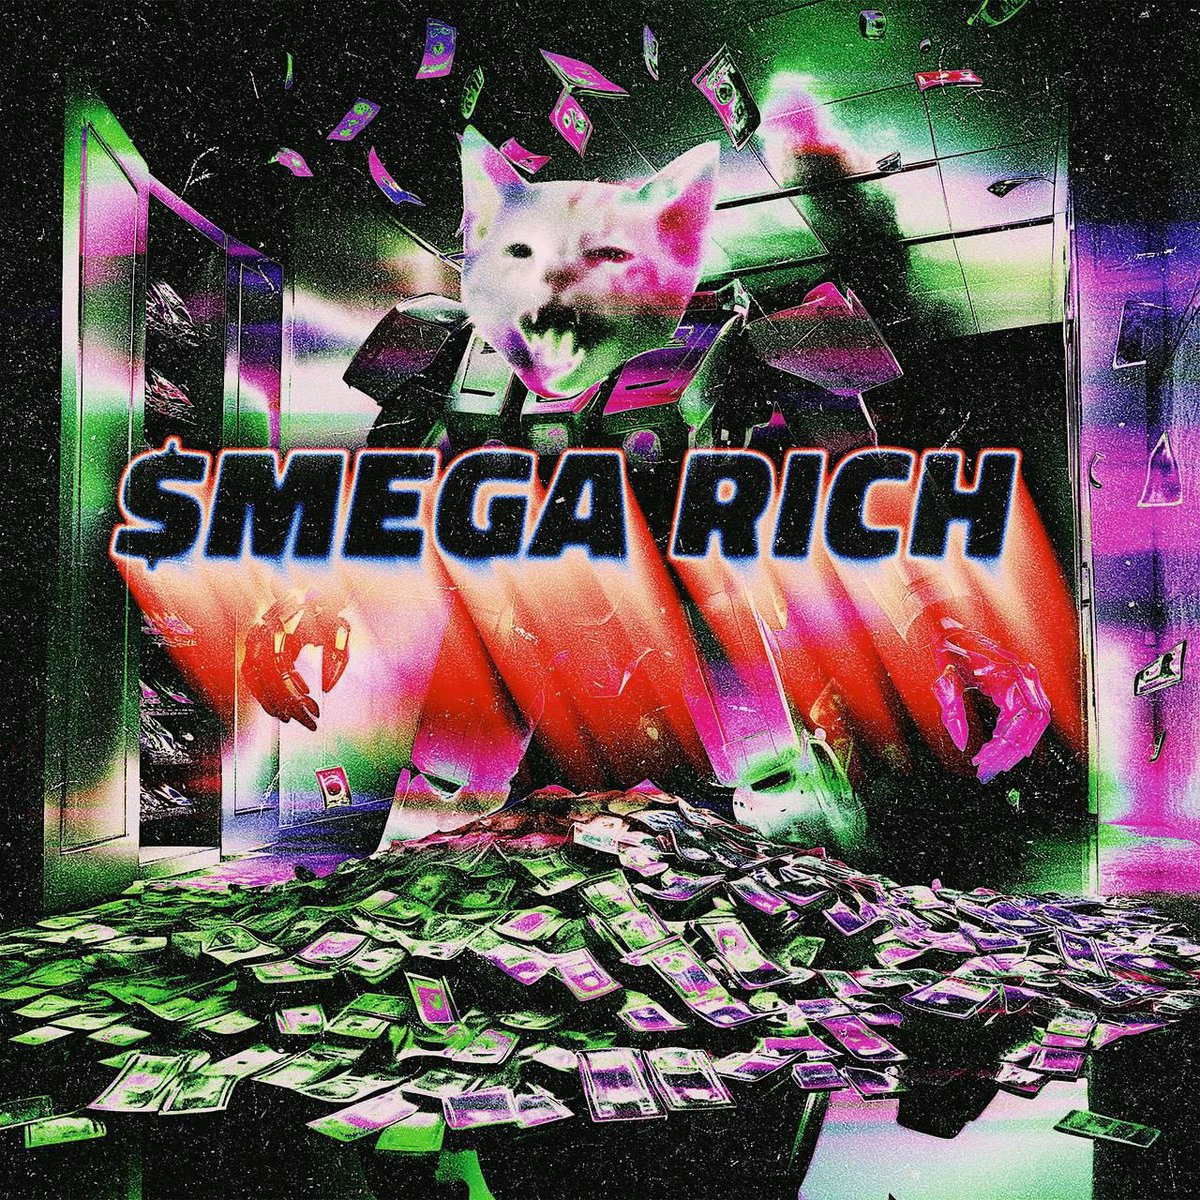 Been accumulating dips on $Mega

CTO team full of goats and the artwork they pumping out is top tier 

They giving away 1% supply at 5m mc which is $50,000 

EPwHMP4thSvp6fXvv83YPznEC5m17x4X3c1eAzXjkML7

Tg: t.me/megatronCTO

Web: megatroncat.com

X: